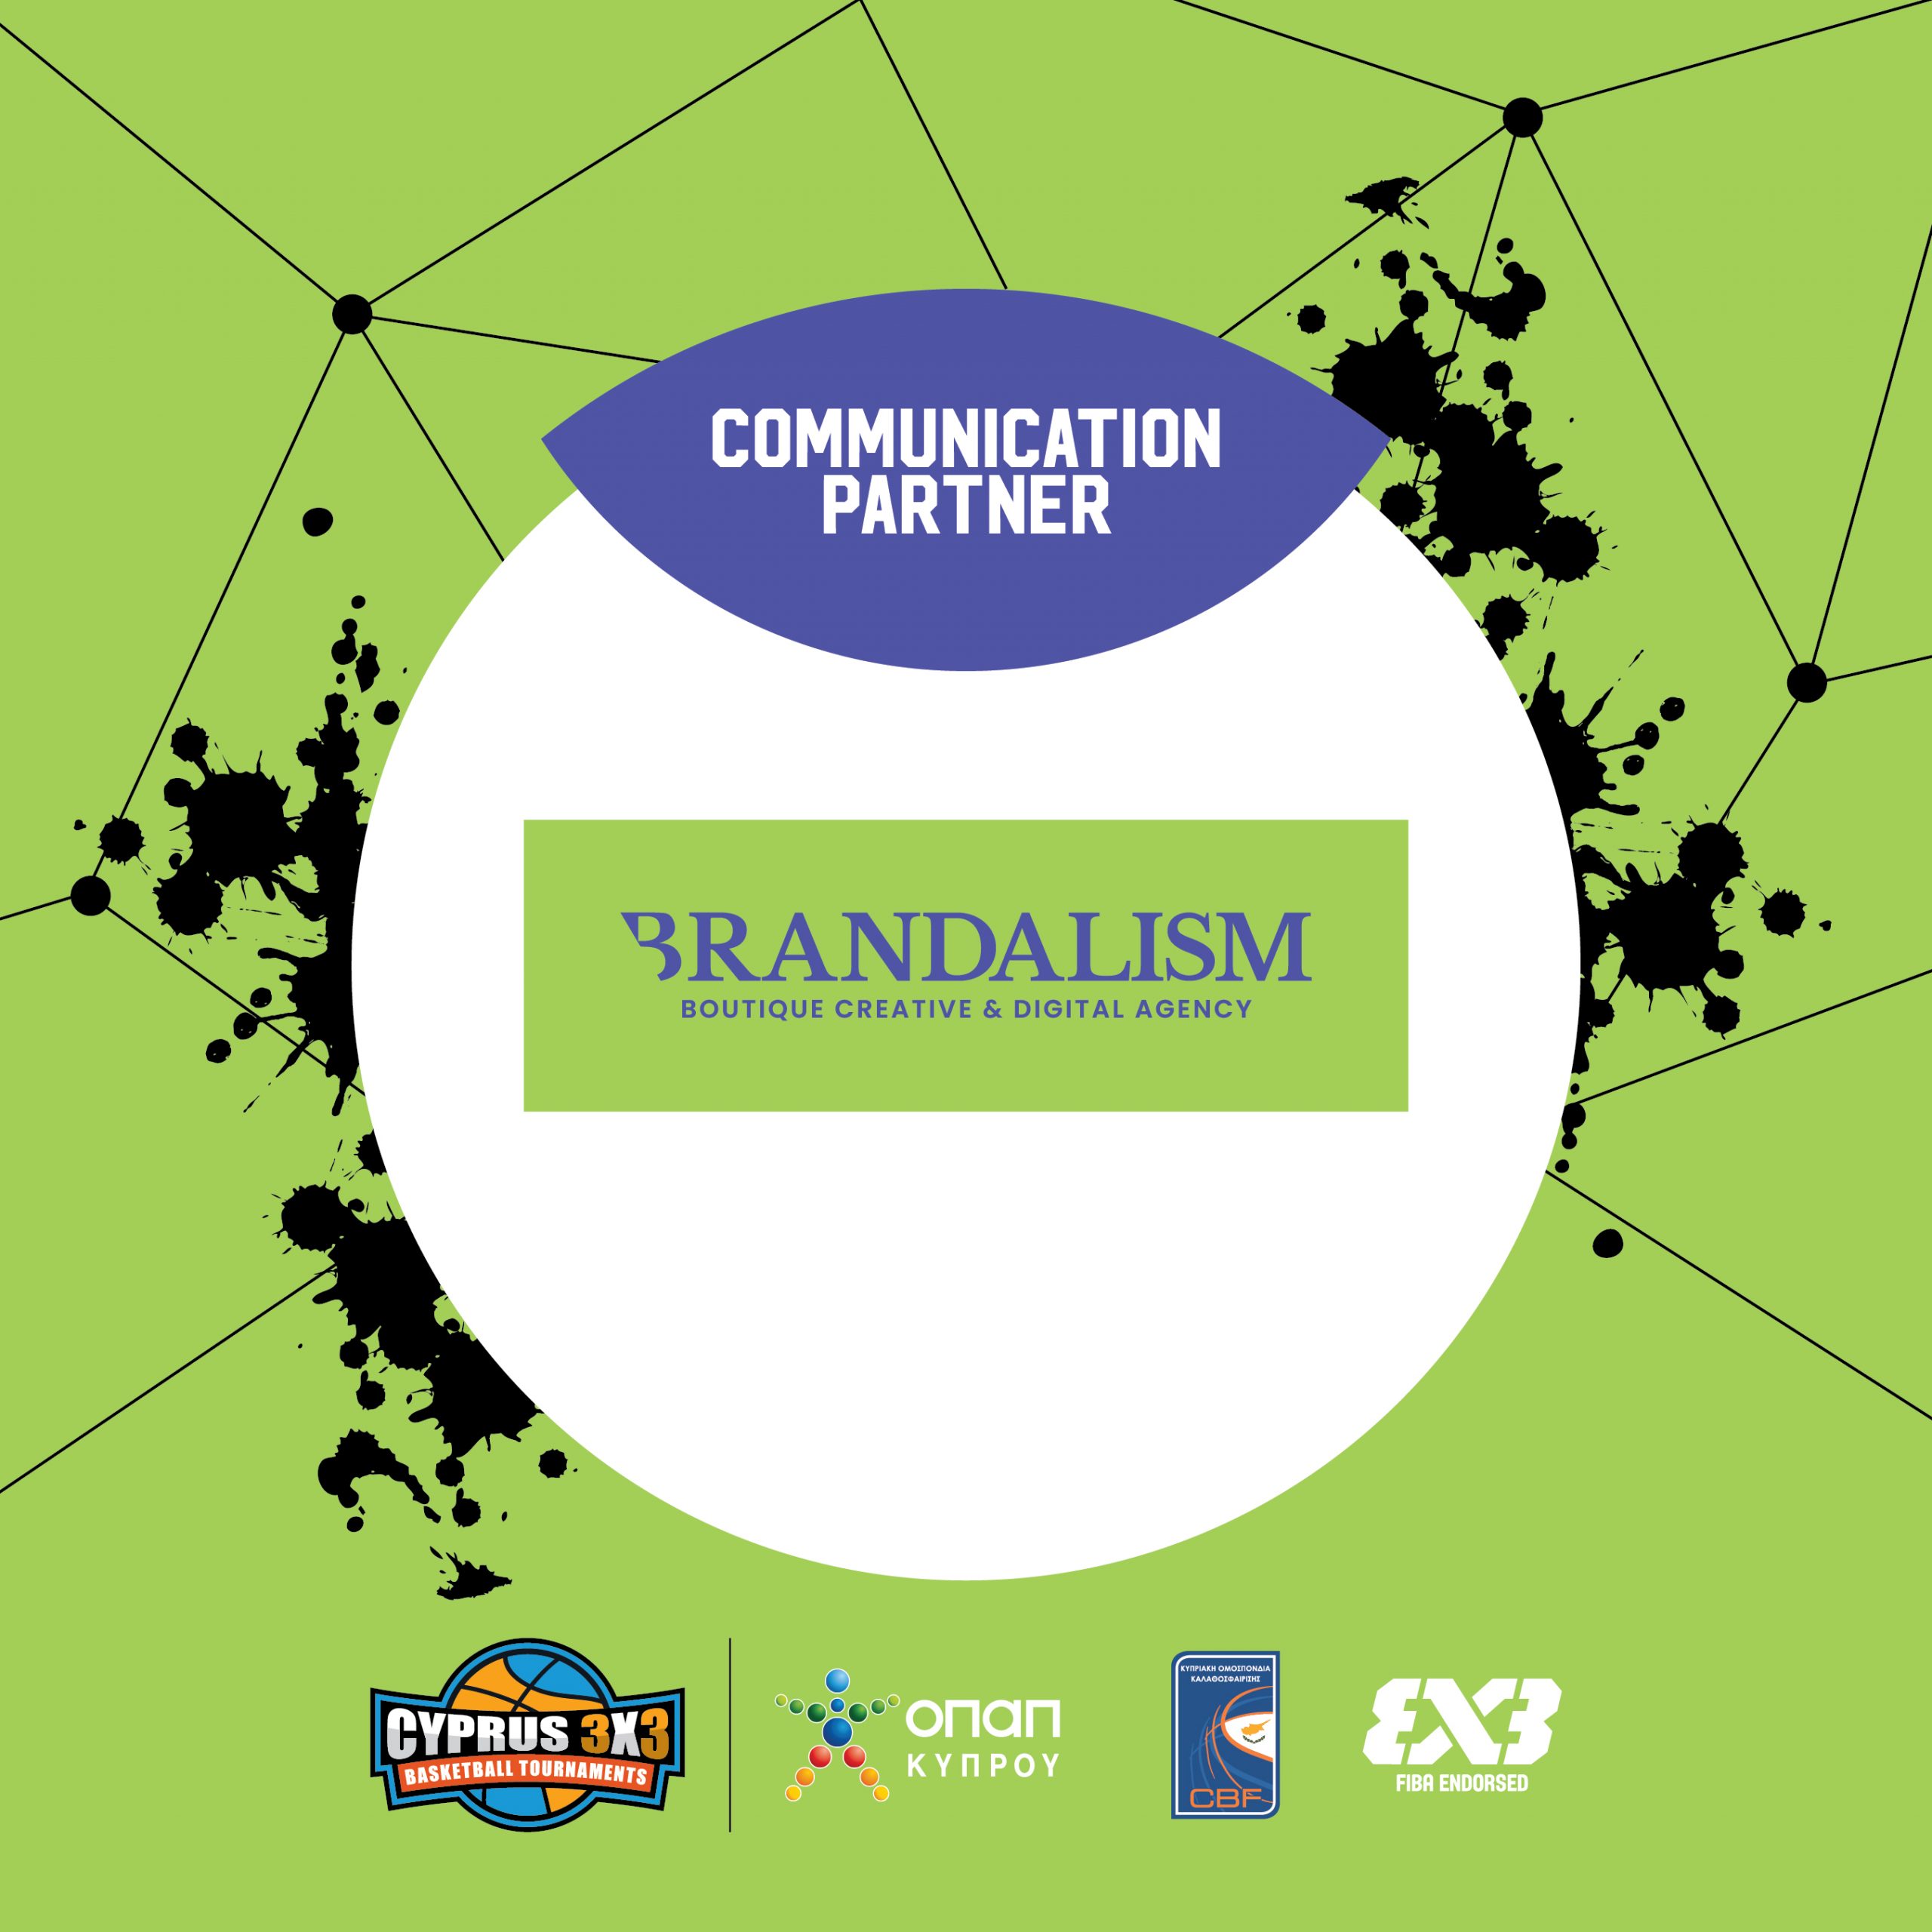 You are currently viewing The Brandalism is showing its support to one of the biggest sports events of our island as Communication Partners.